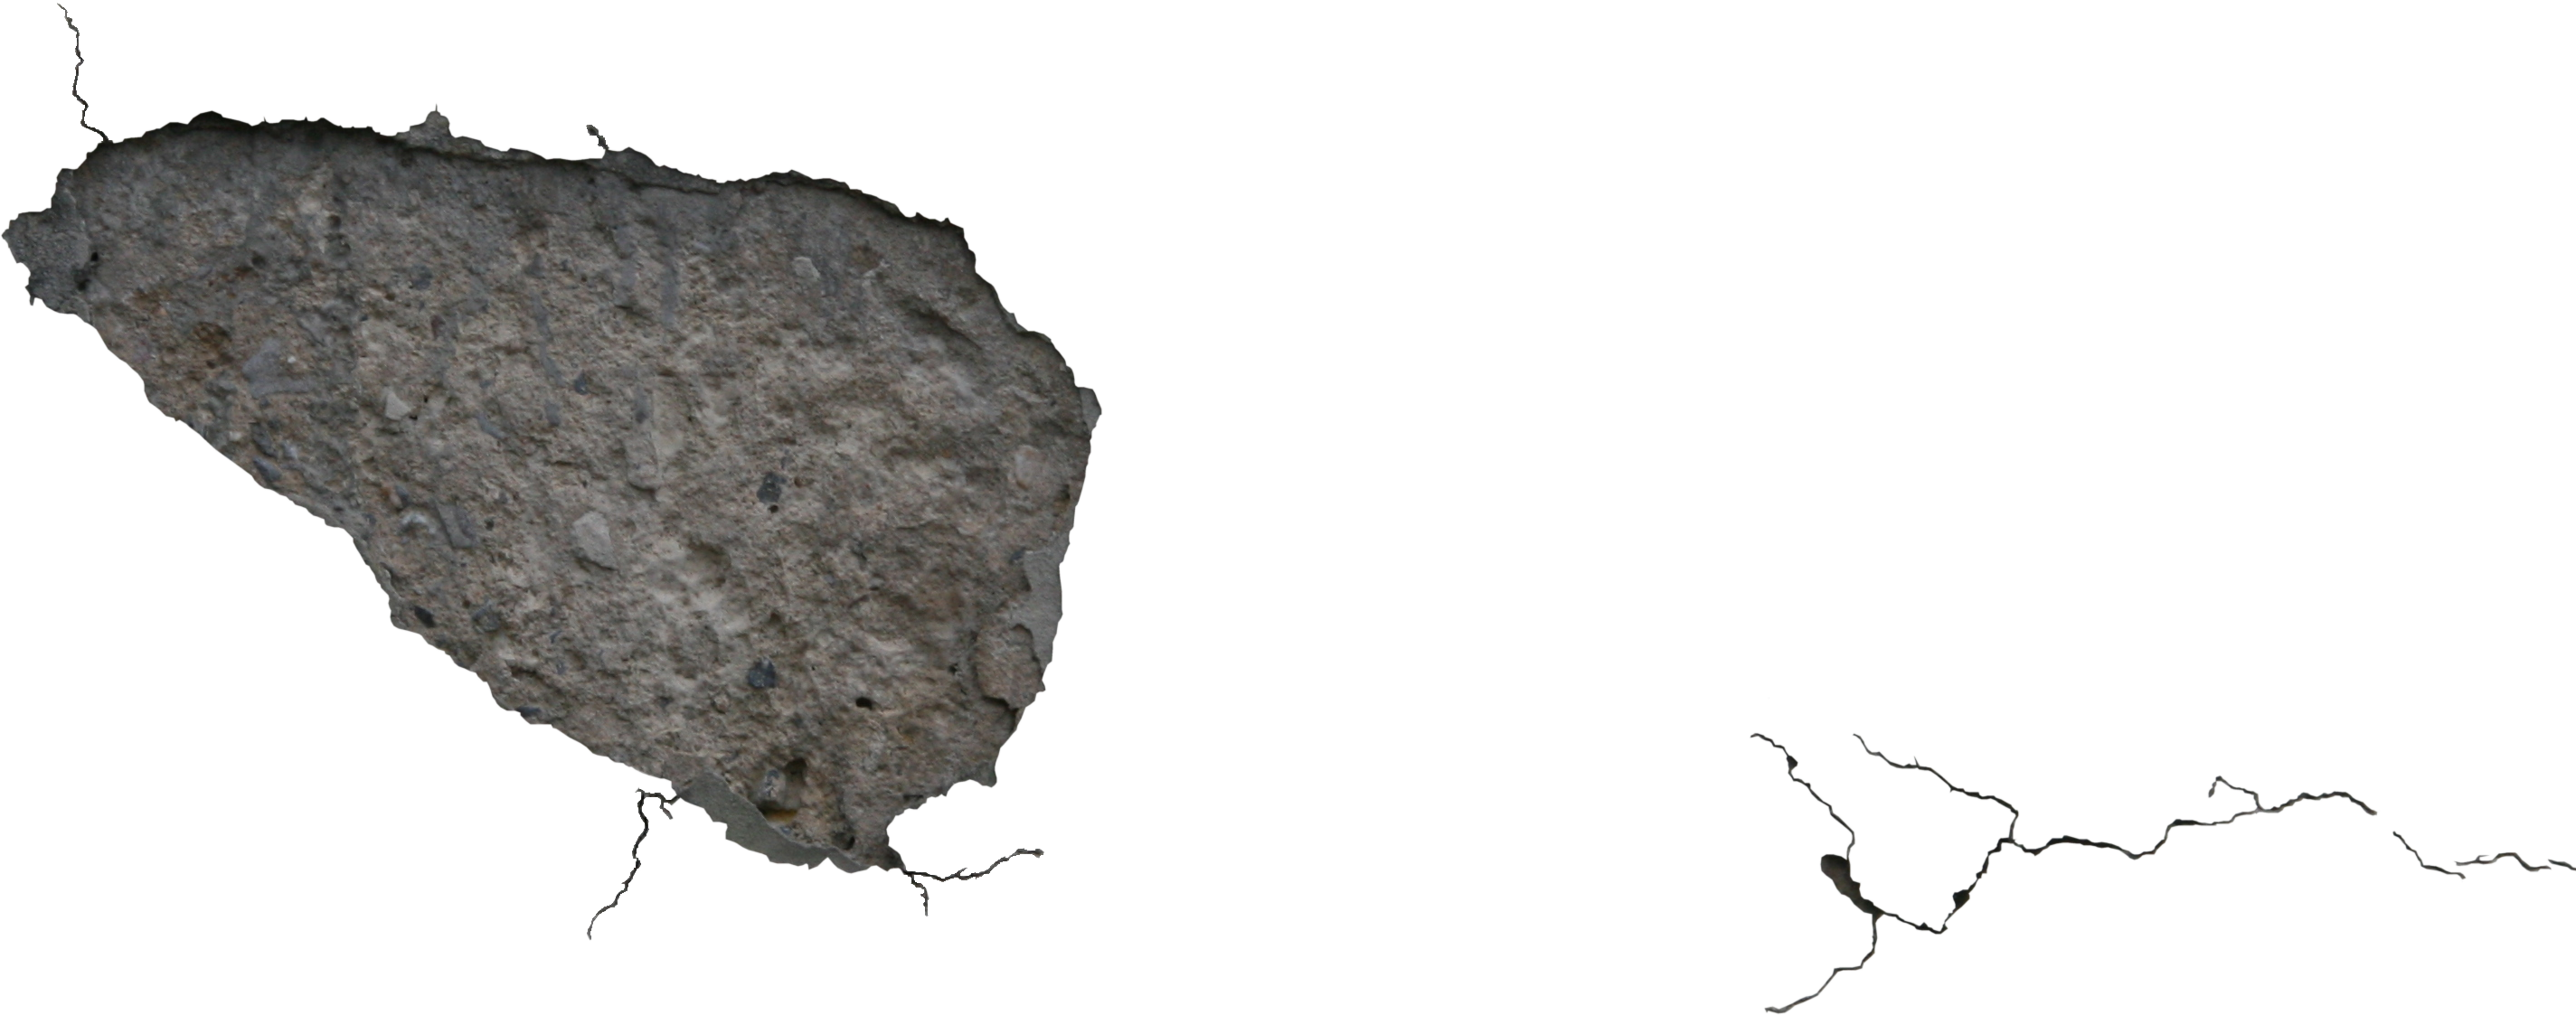 Image Download Png For Free - Crack Decal Texture Png (2849x1123)